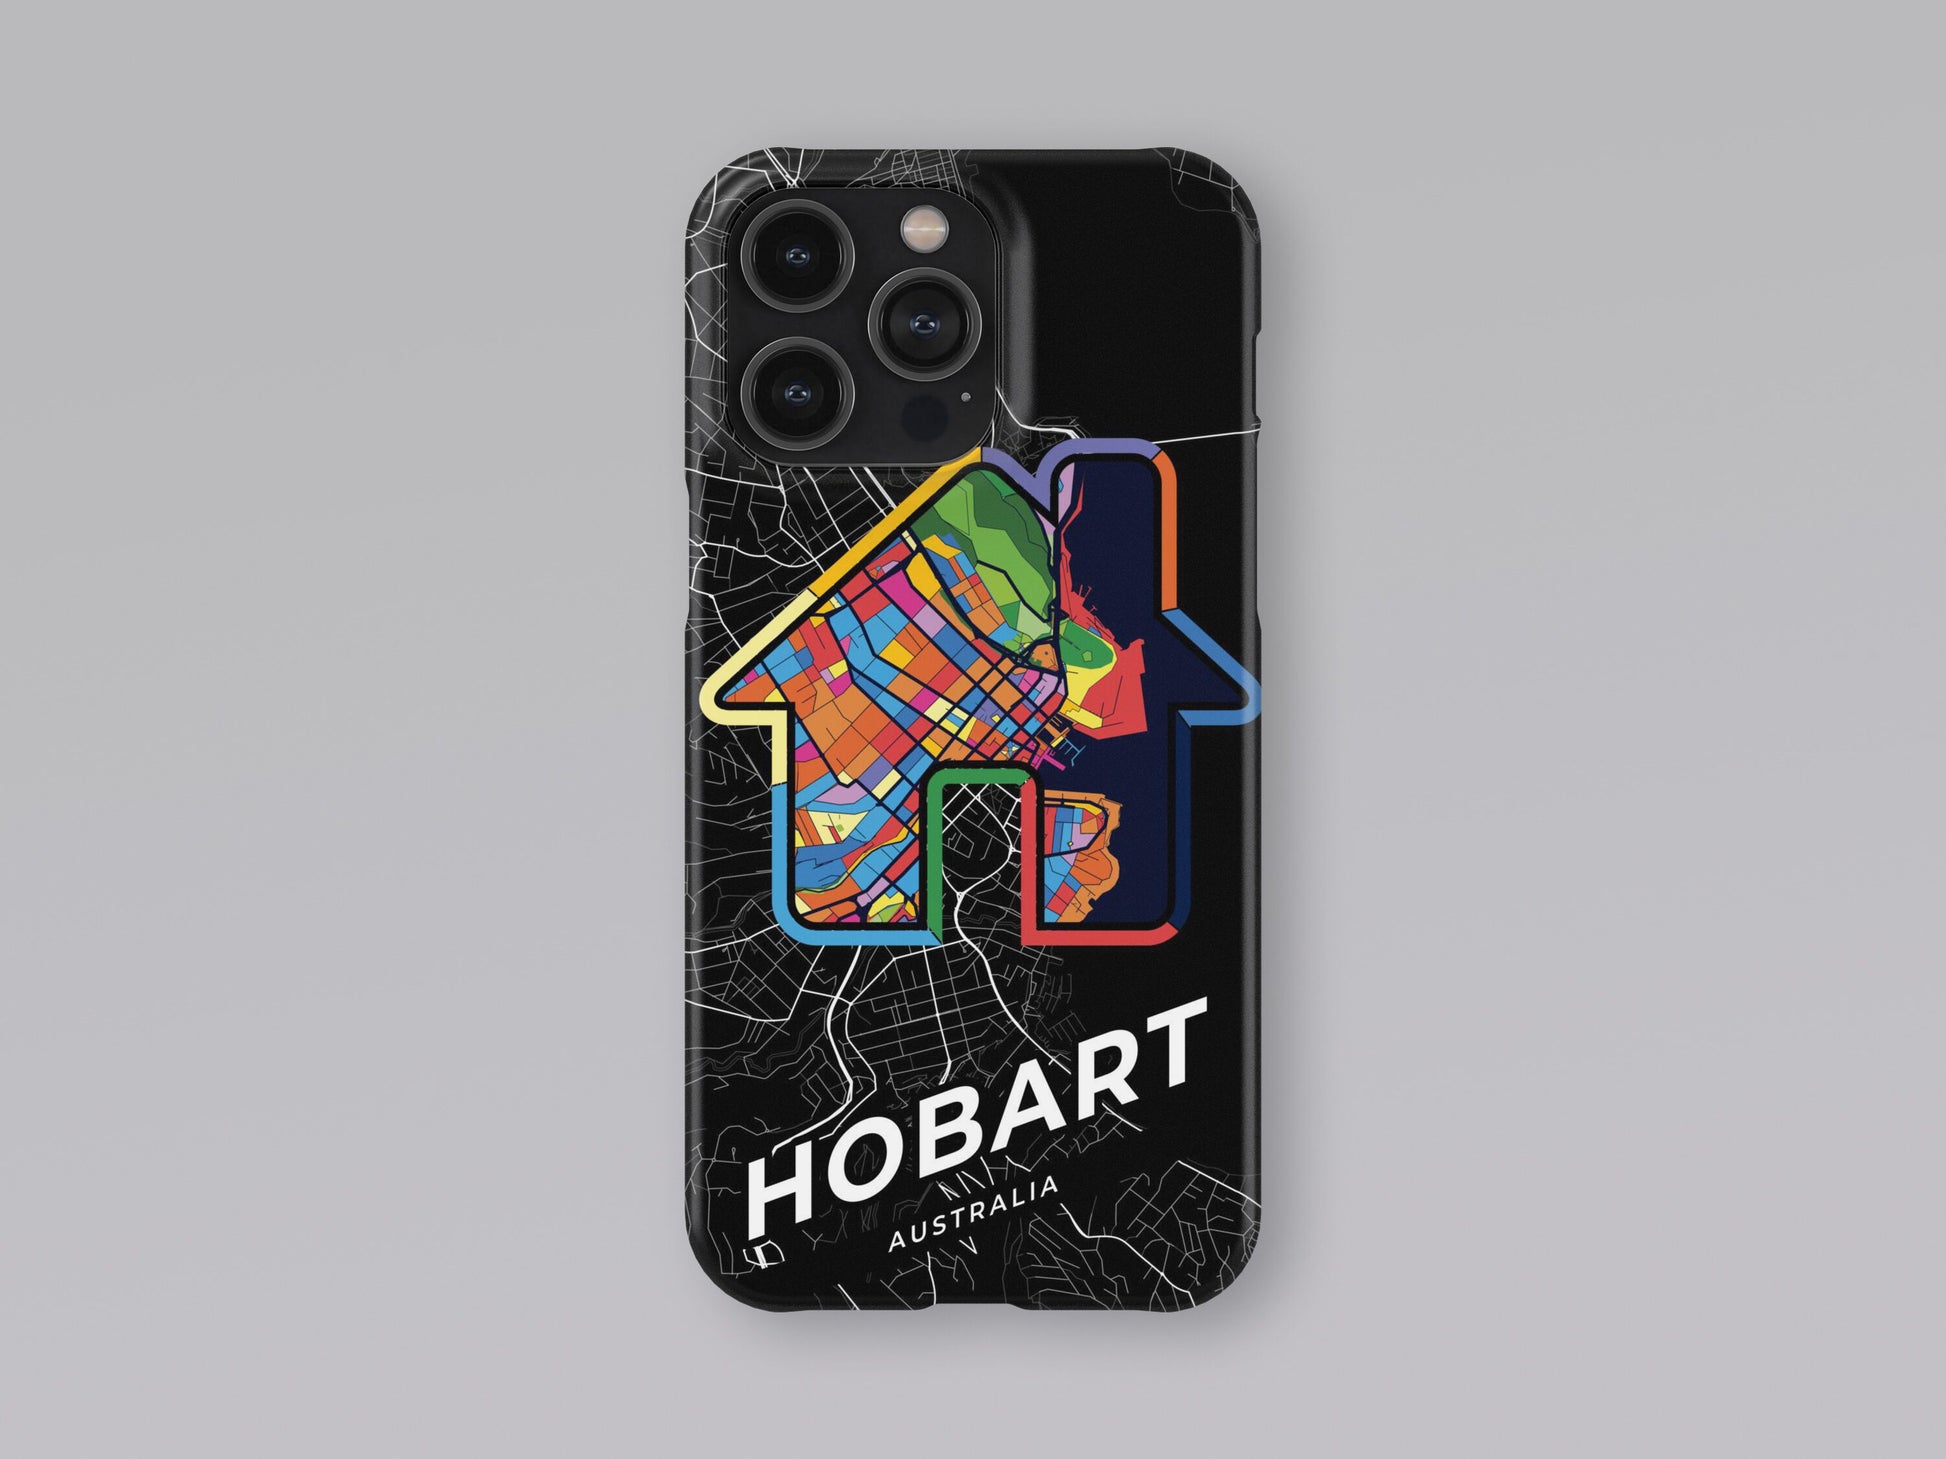 Hobart Australia slim phone case with colorful icon. Birthday, wedding or housewarming gift. Couple match cases. 3